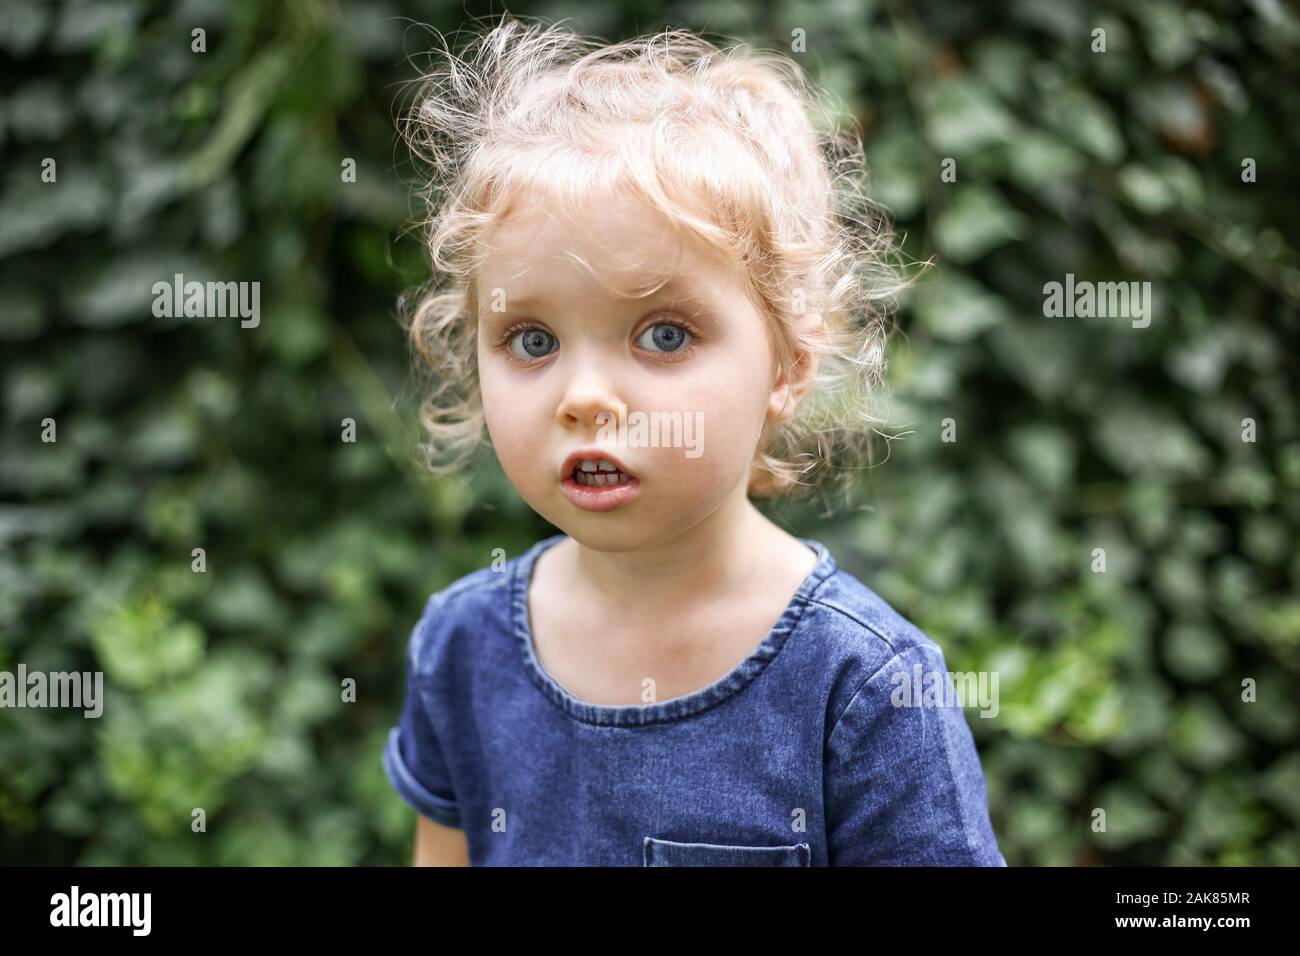 Sweet Blonde Child Curly Hair High Resolution Stock Photography And Images Alamy